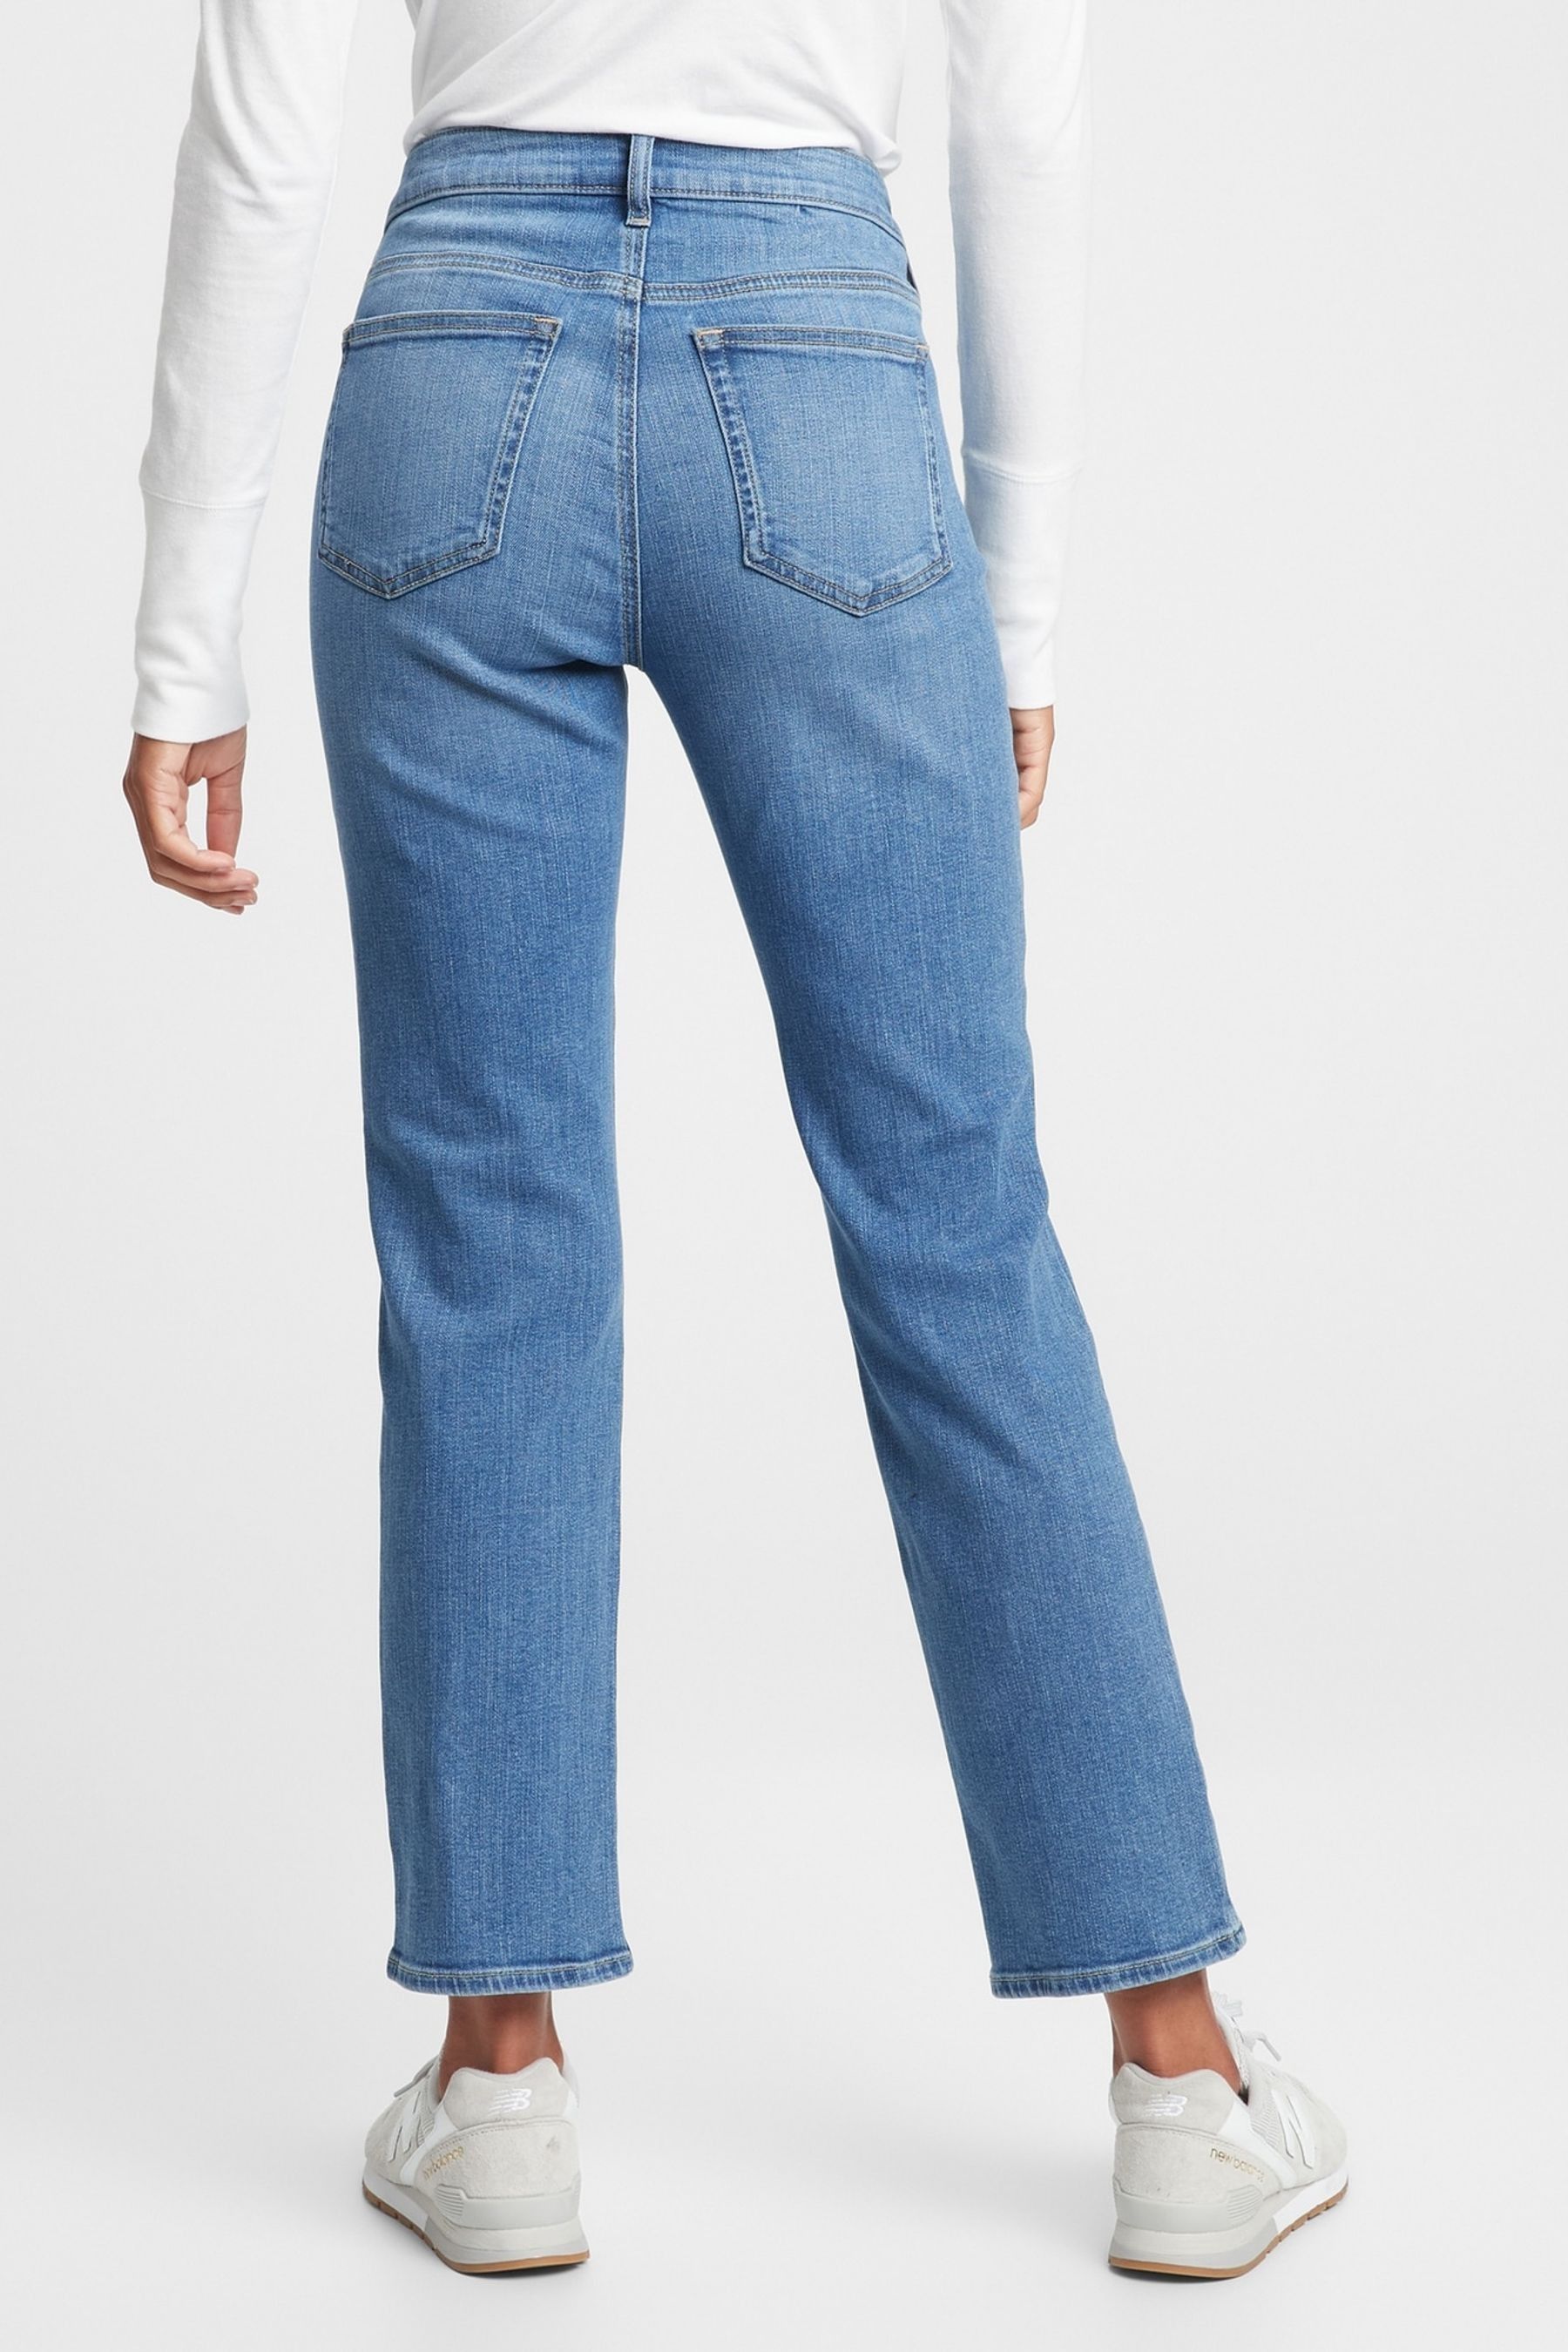 Buy Mid Rise Classic Straight Leg Jeans from the Gap online shop